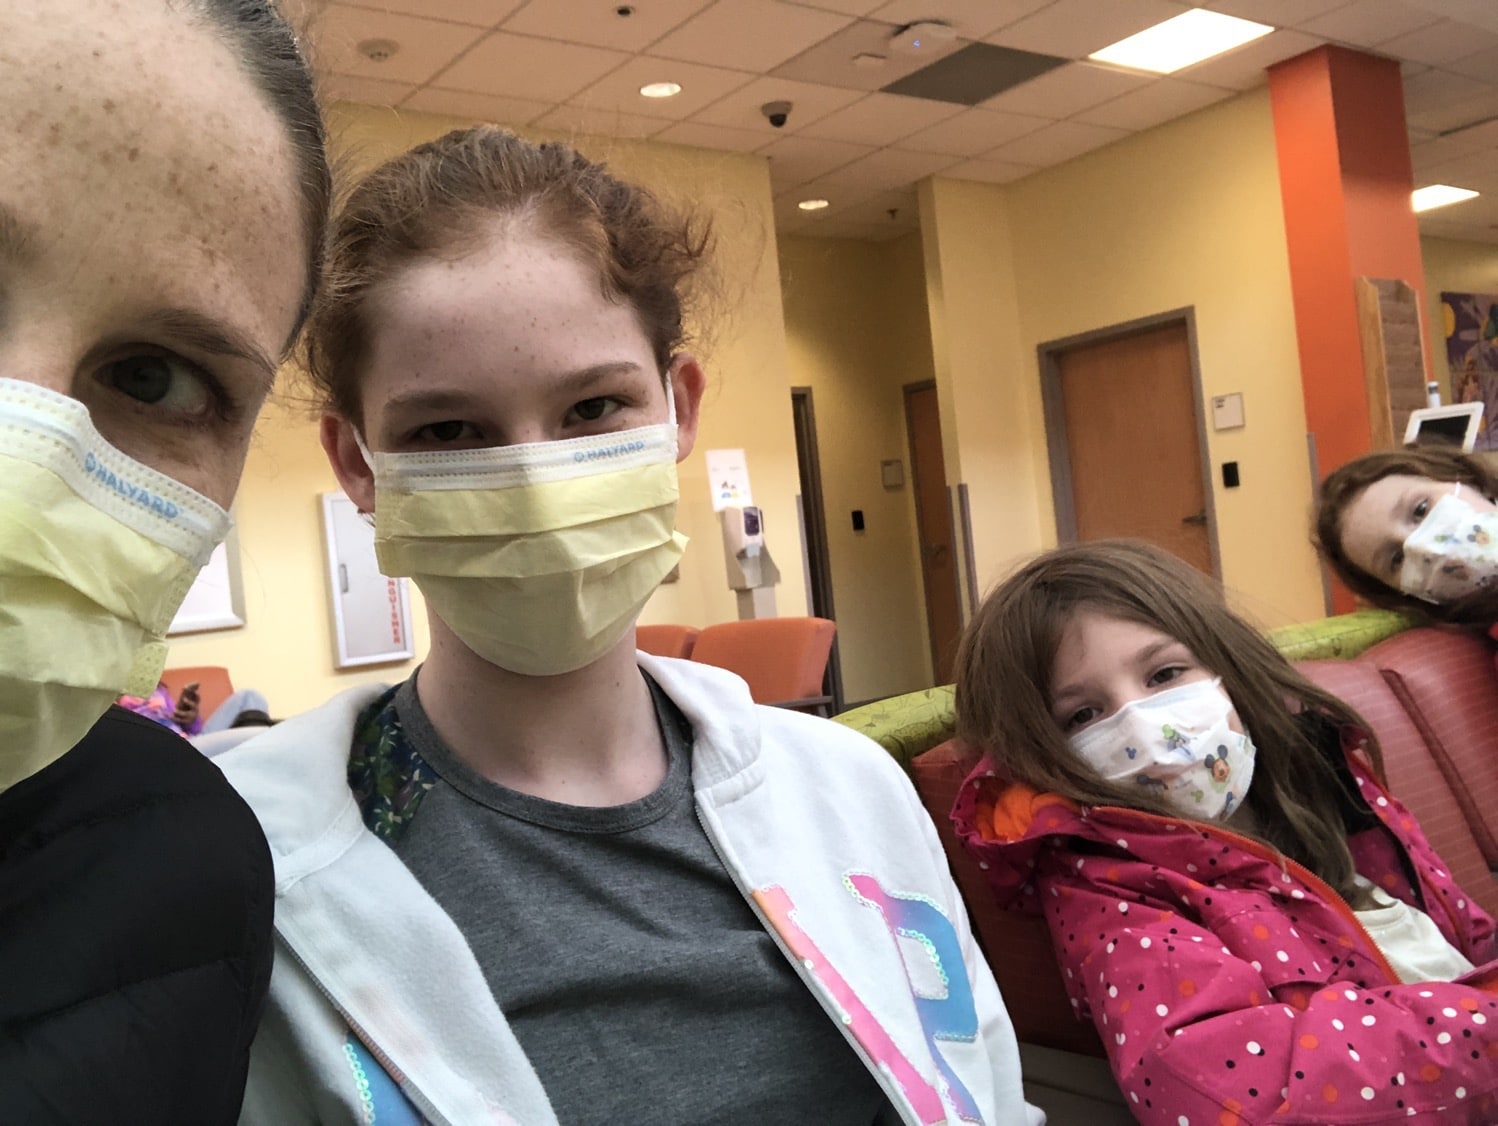 Back at urgent care | The plague